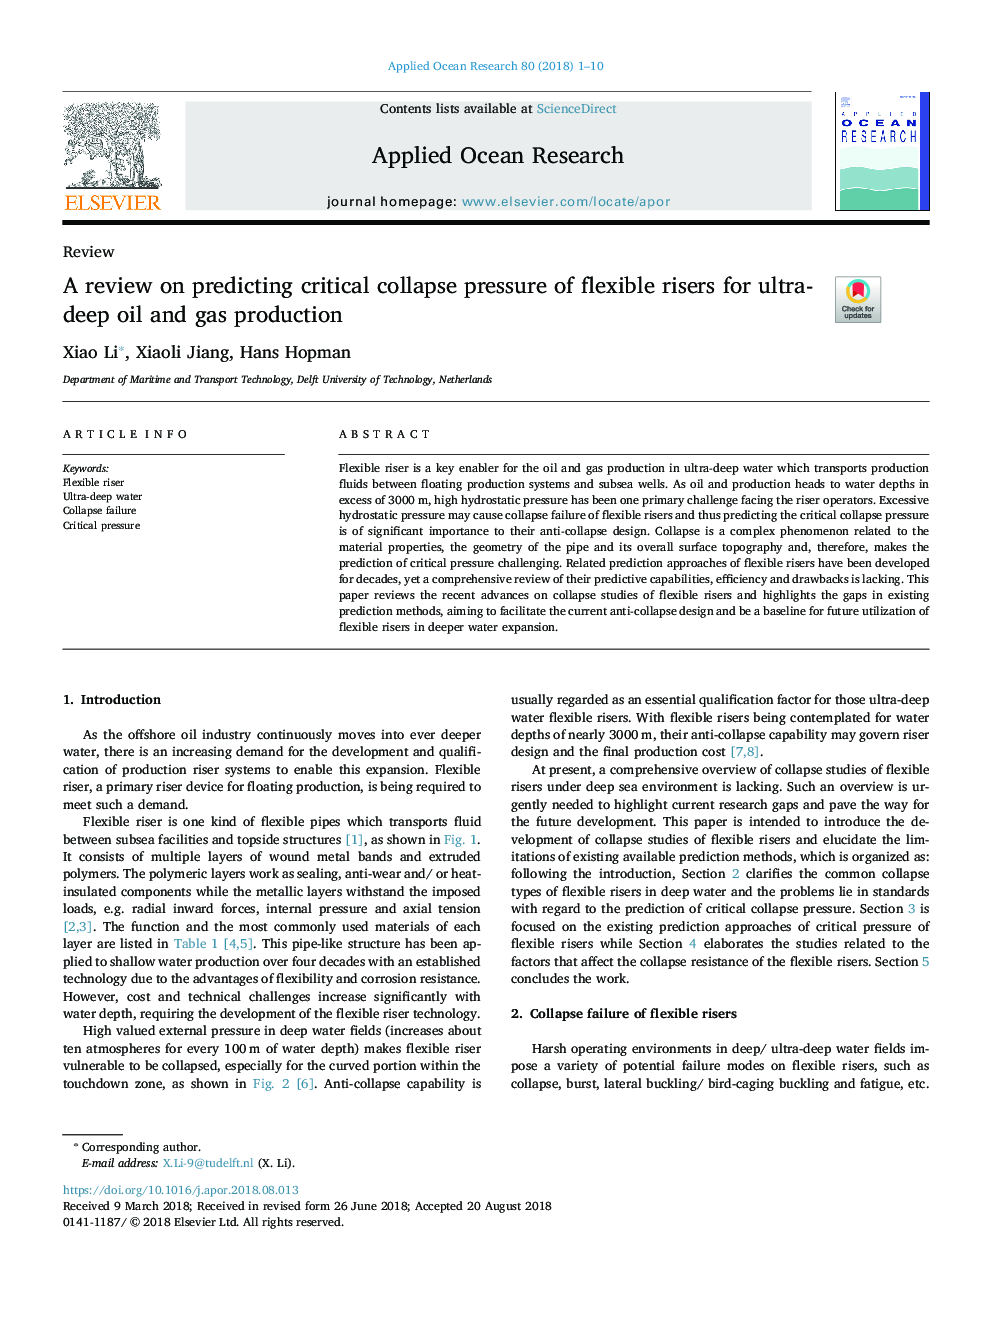 A review on predicting critical collapse pressure of flexible risers for ultra-deep oil and gas production